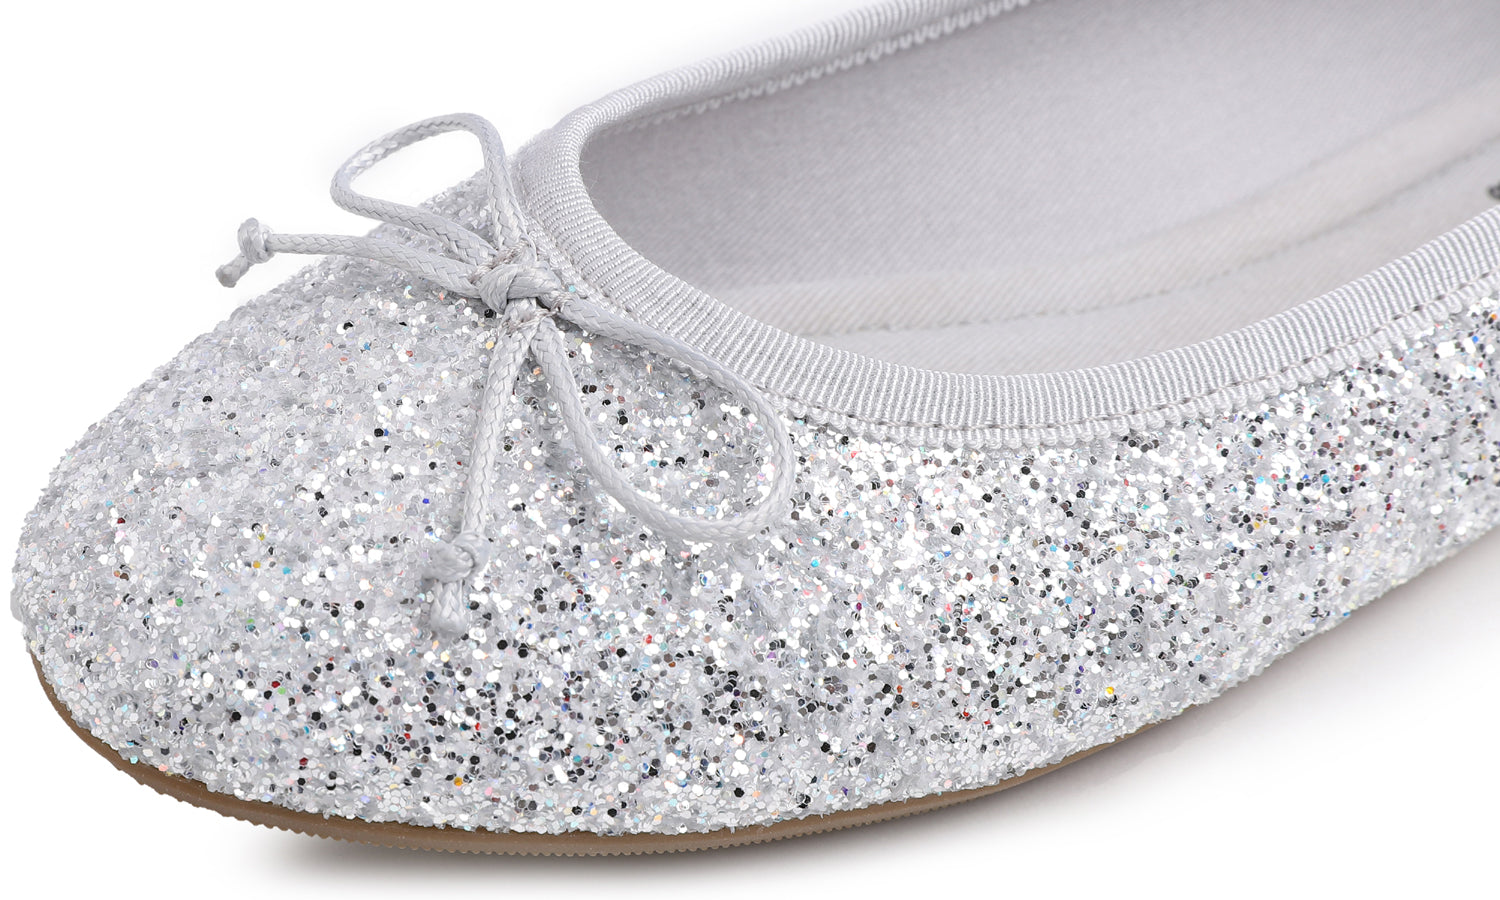 Feversole Women's Sparkle Memory Foam Cushioned Colorful Shiny Ballet Flats Glitter Ice Silver